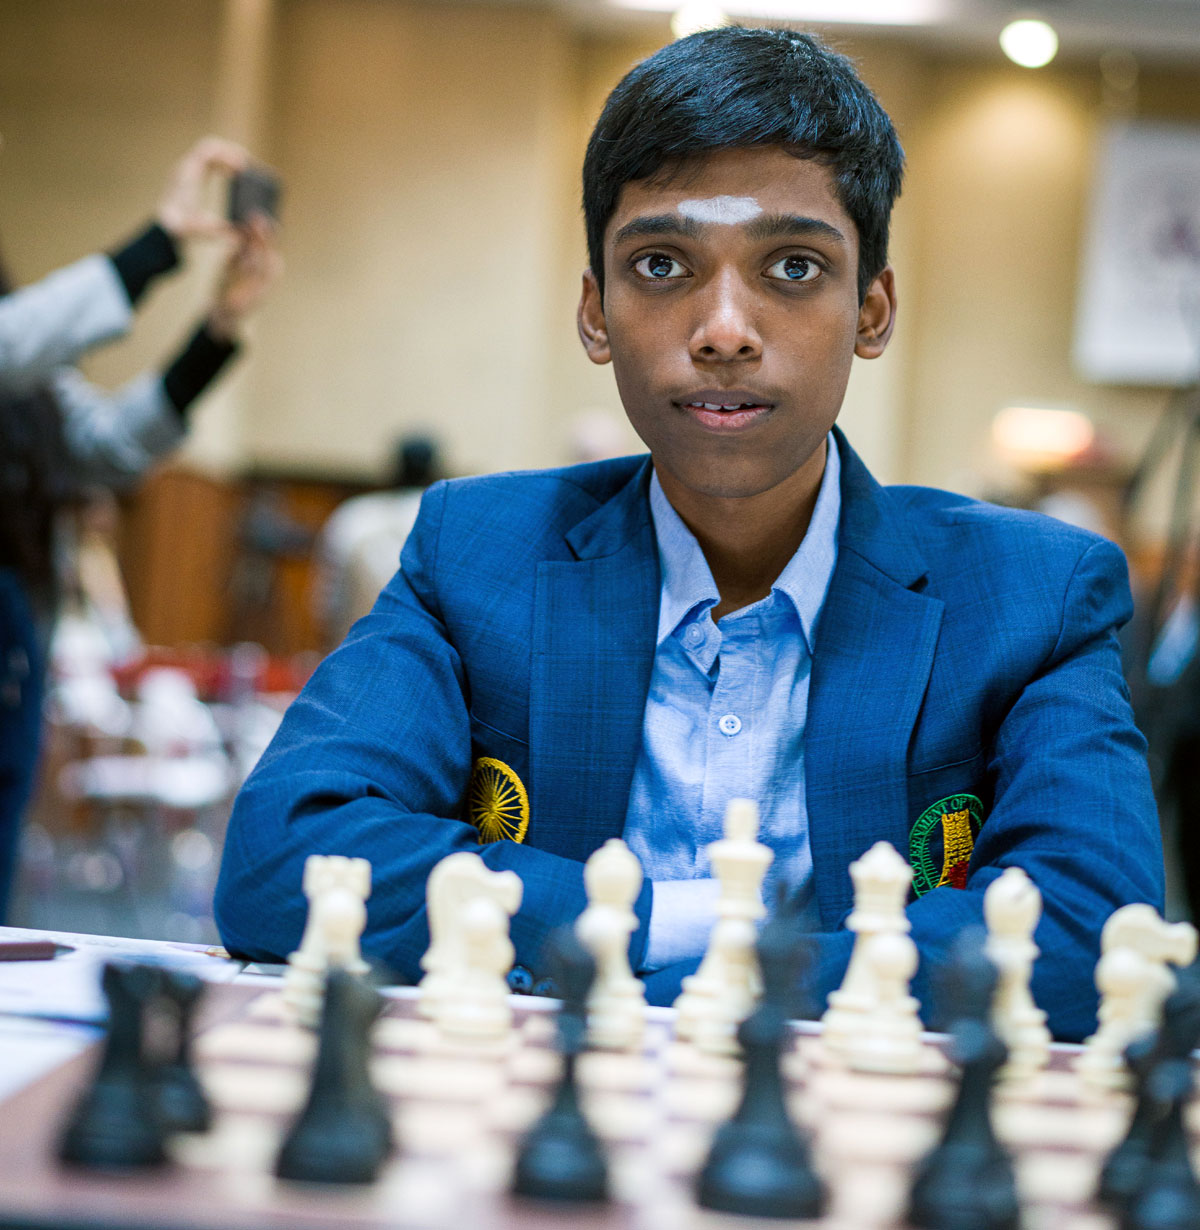 ChessBase India on X: Huge congratulations to Arjun Erigaisi for